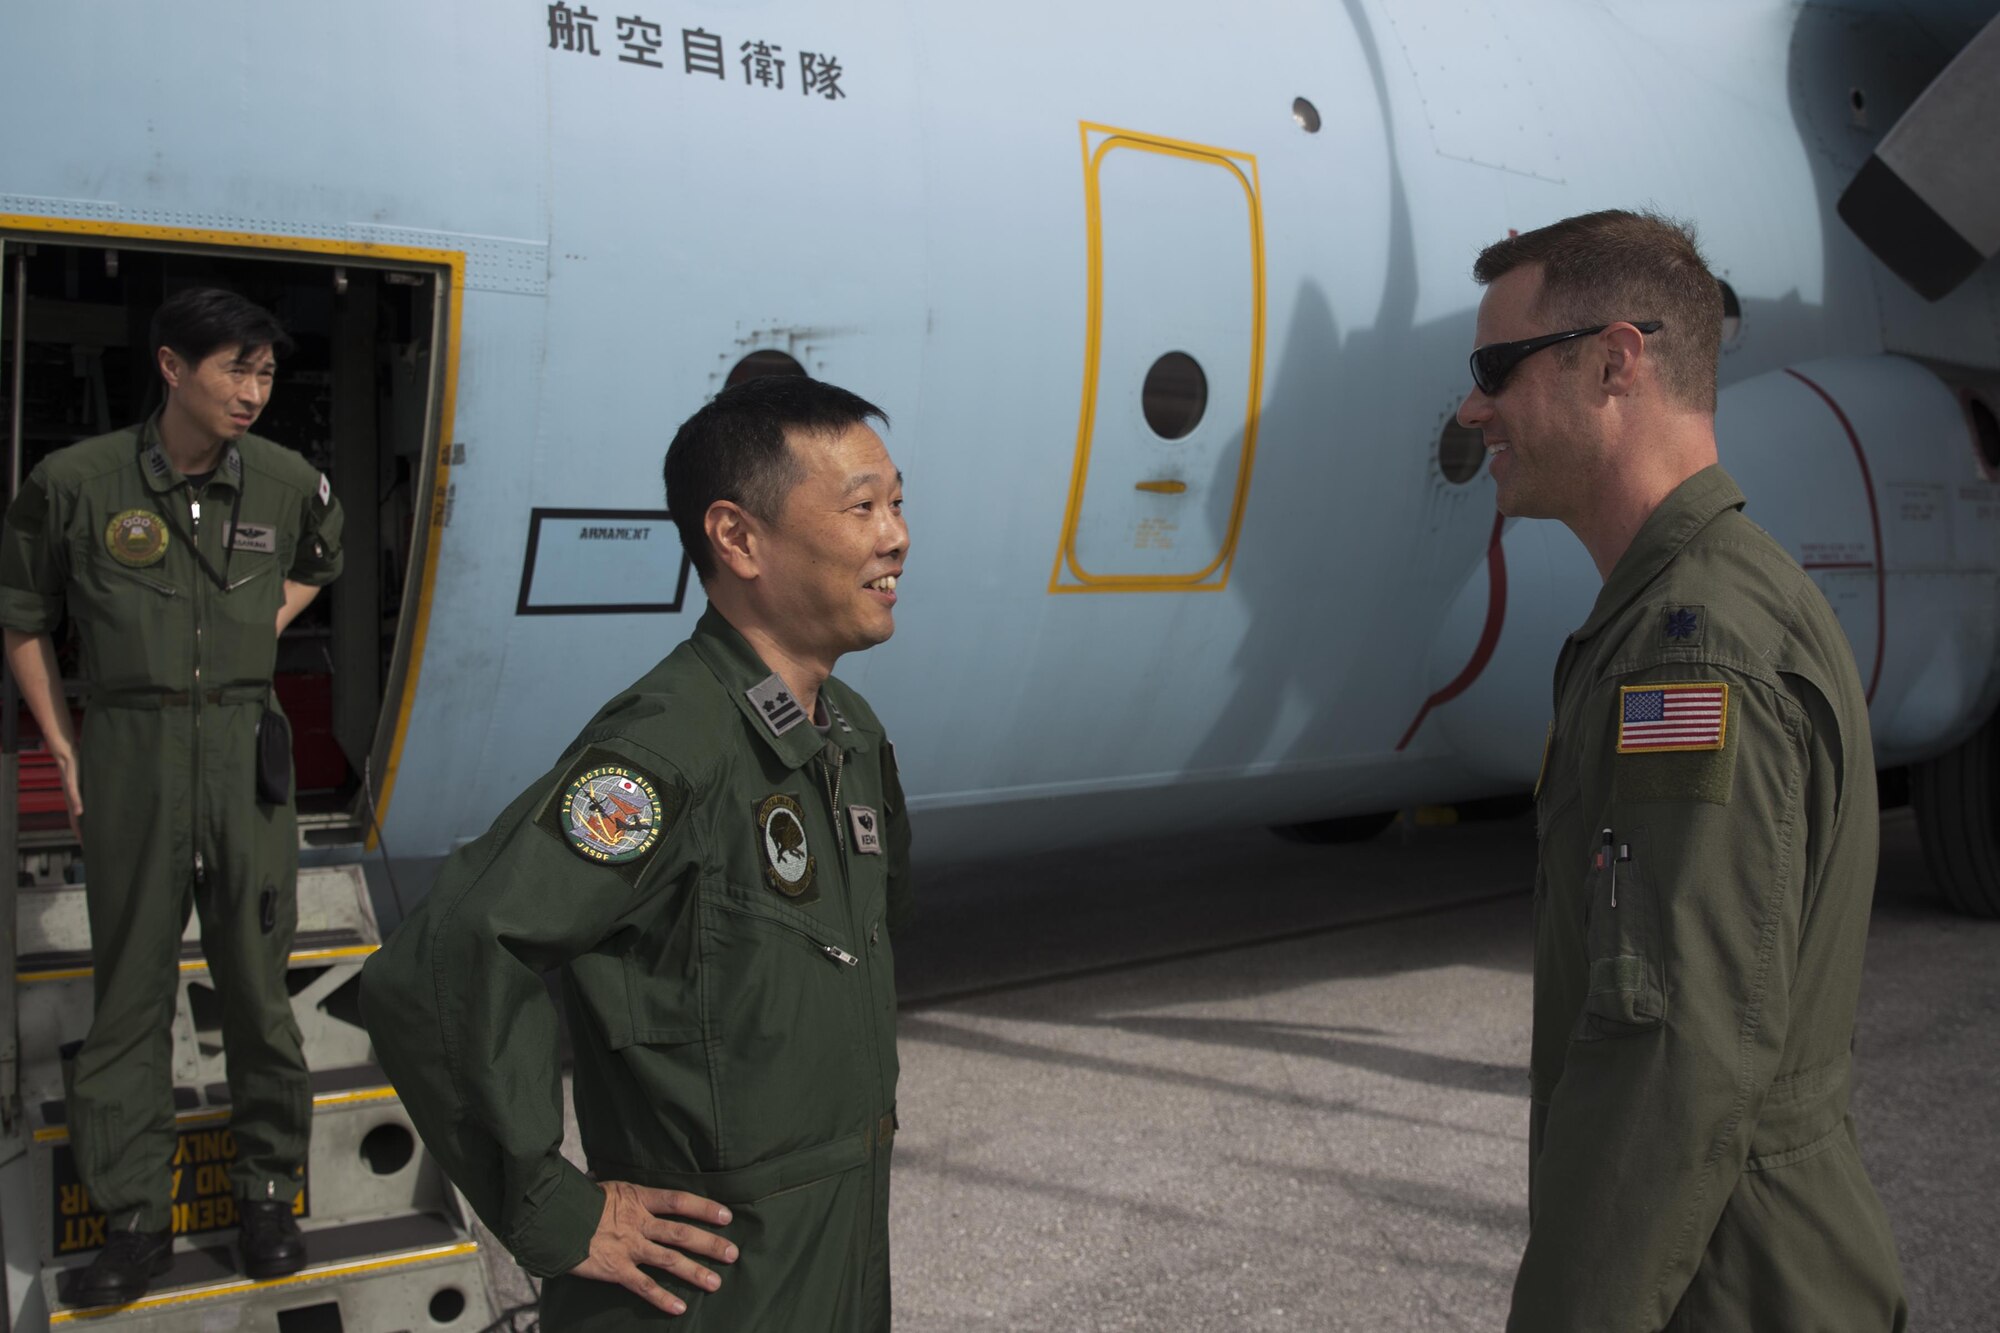 (Right to left) U.S. Air Force Lt. Col. John Kerr, 36th Airlift Squadron director of operations, greets Japan Air Self-Defense Force Lt. Col. Ken Ikemori, 401st Squadron commander, at Andersen Air Force Base, Guam, Dec. 4, 2015. Operation Christmas Drop is a humanitarian aid/disaster relief training event where C-130 aircrews perform low-cost low-altitude airdrops on unsurveyed drop zones while providing critical supplies to 56 islands throughout the Commonwealth of the Northern Marianas, Federated States of Micronesia and Republic of Palau. It highlights the U.S. and allied airpower capabilities to orient and respond to activities in peacetime and crisis. In addition to delivering critical supplies to those in need, Operation Christmas Drop provides specific training to U.S. and allied aircrews, enabling theater-wide airpower. (U.S. Air Force photo by Osakabe Yasuo/Released)